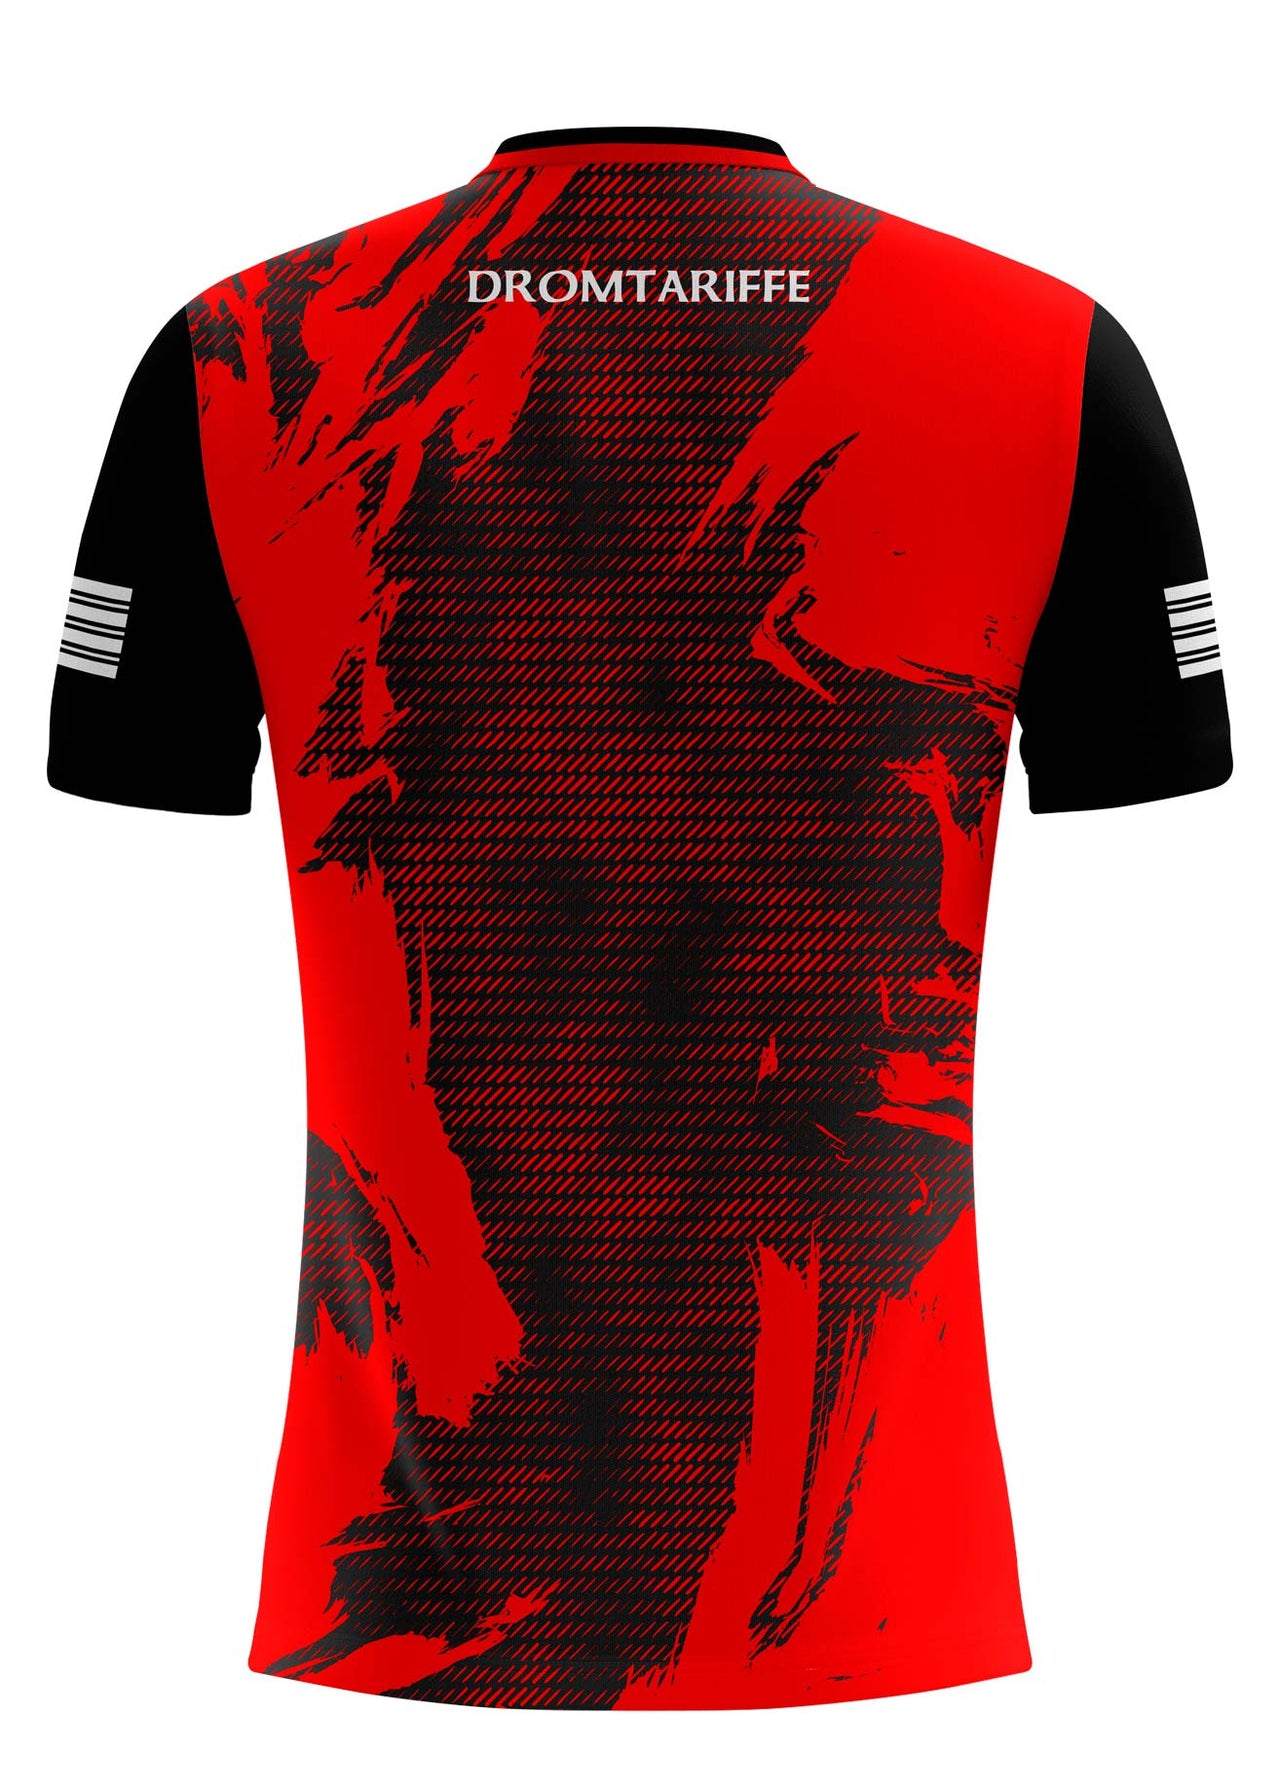 Dromtarriffe CLG Boa Style Training Jersey Regular Fit Adult